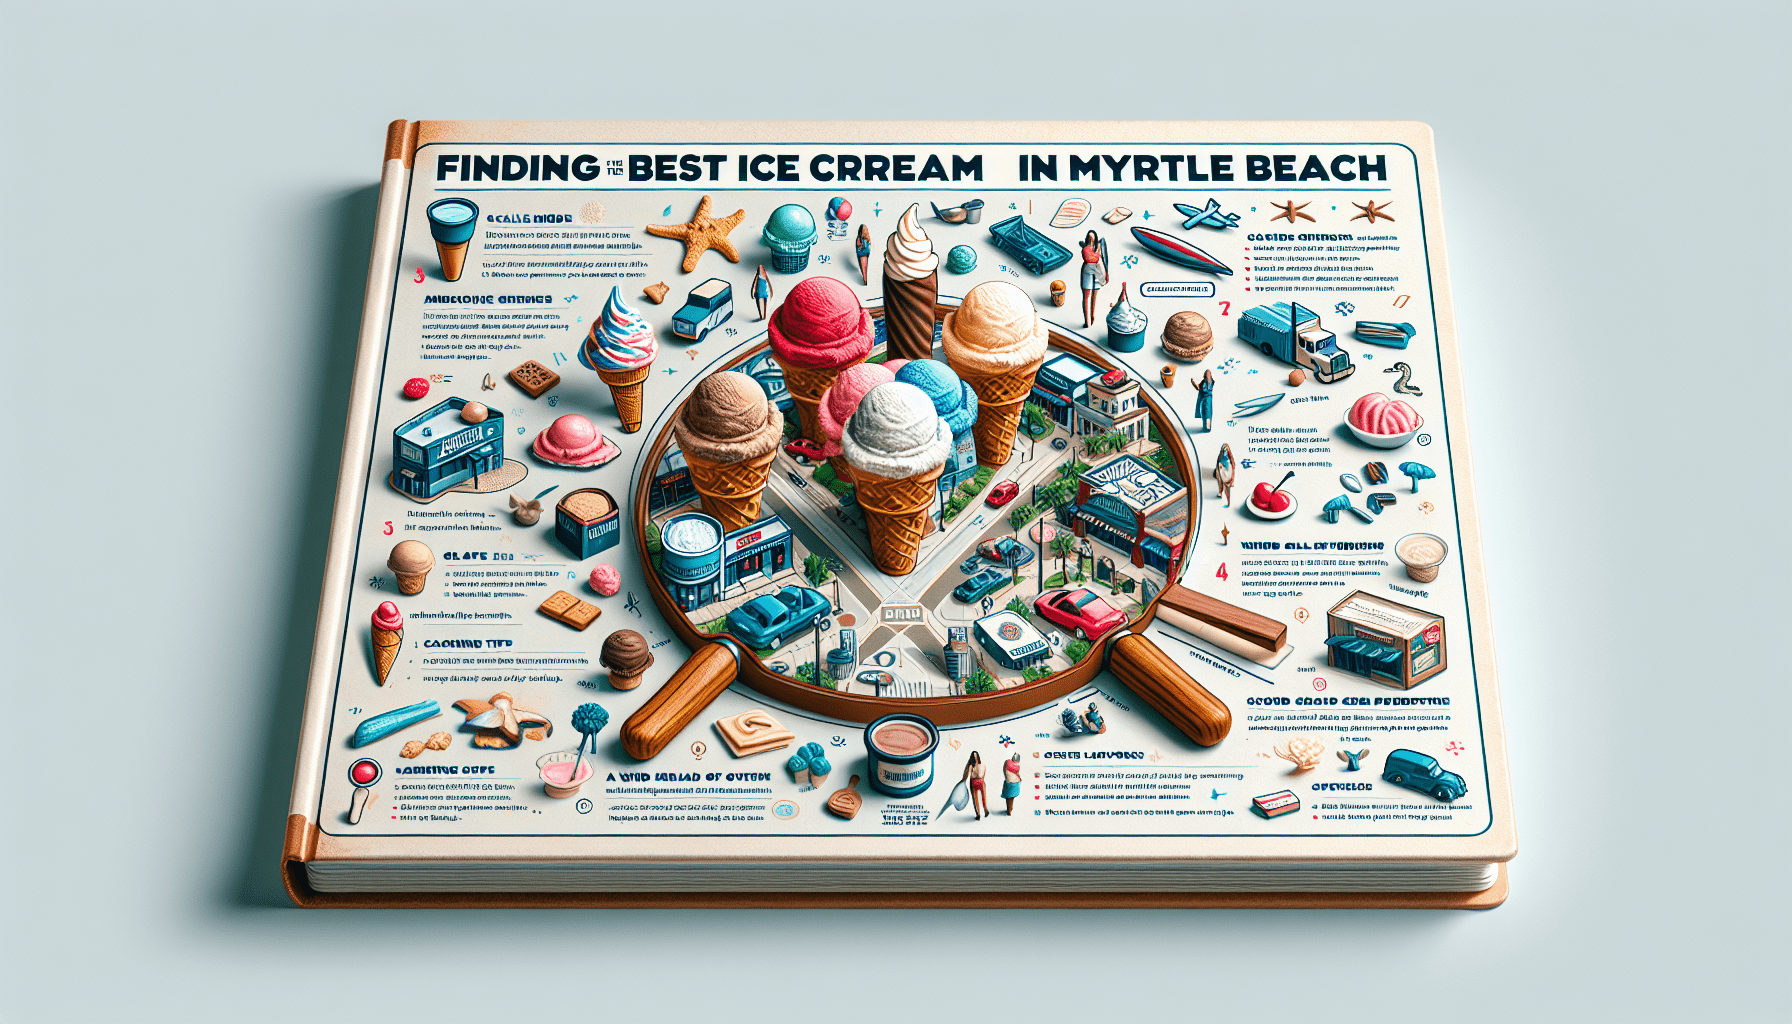 The Ultimate Guide to Finding the Best Ice Cream in Myrtle Beach